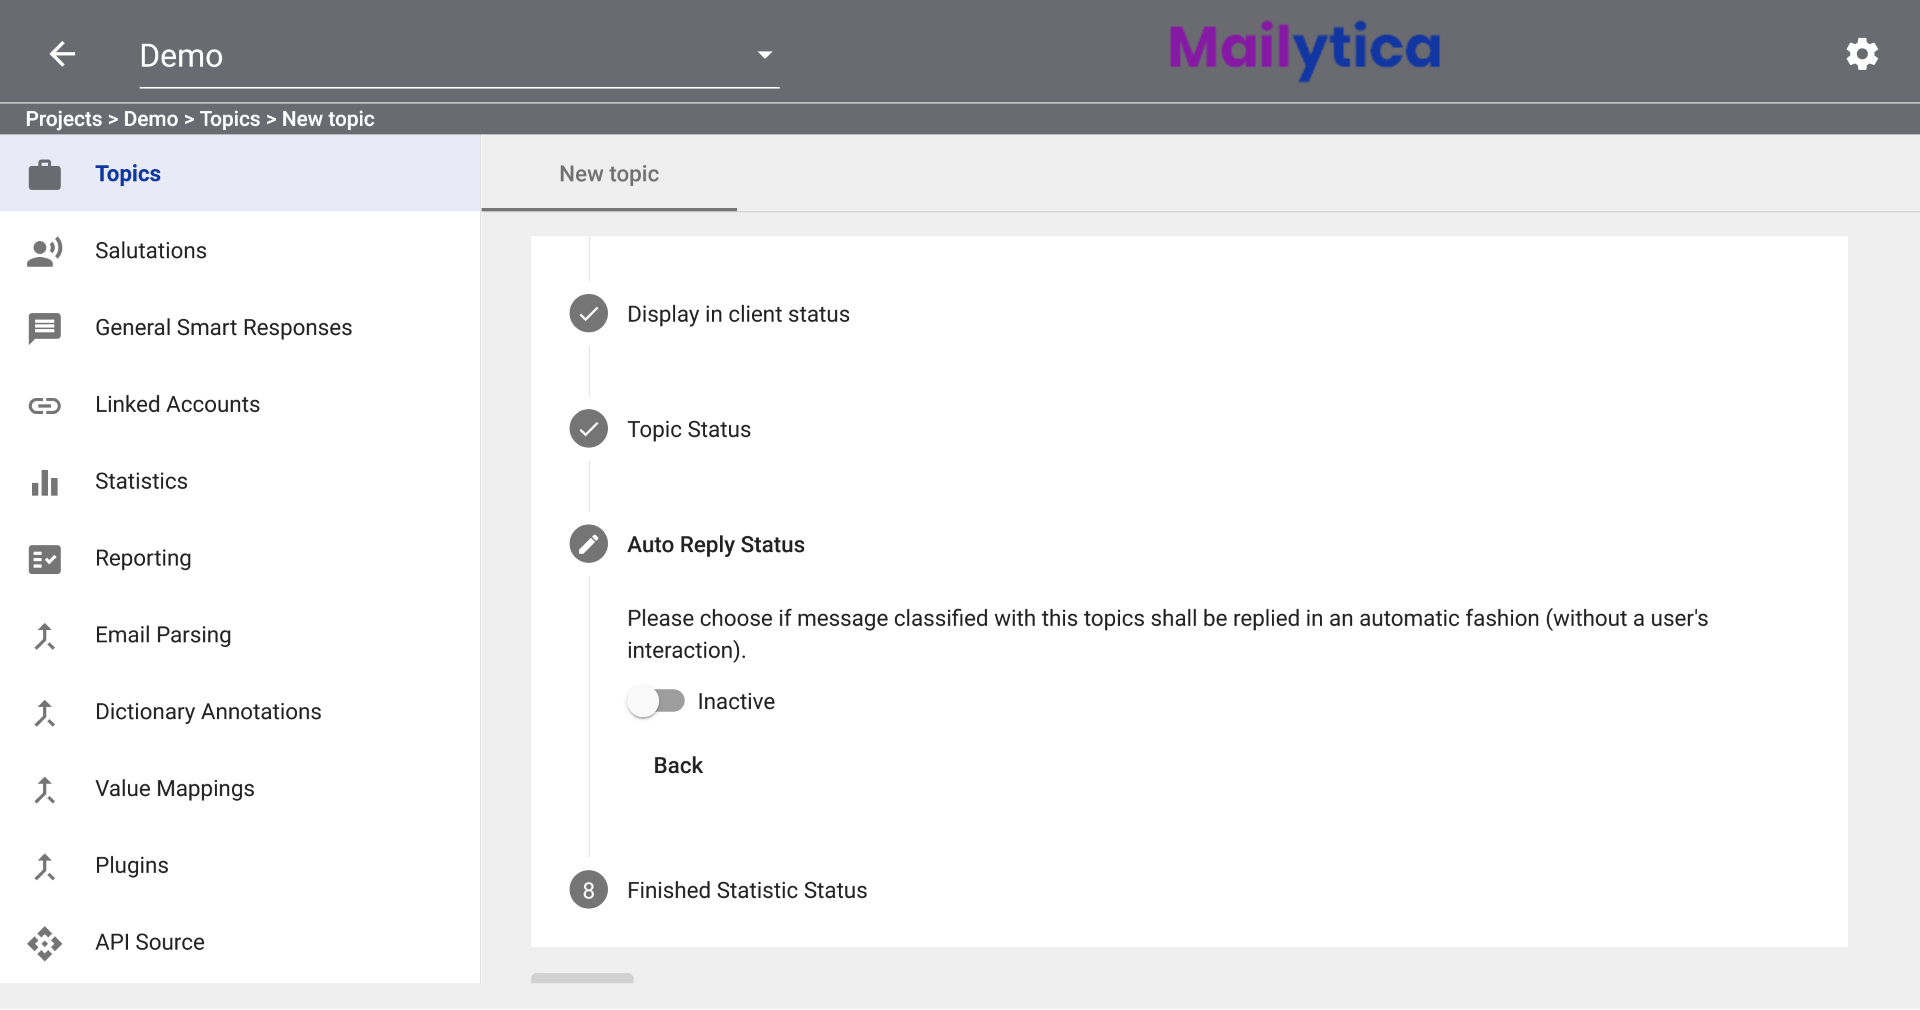 Select the Auto Reply Status of your topic